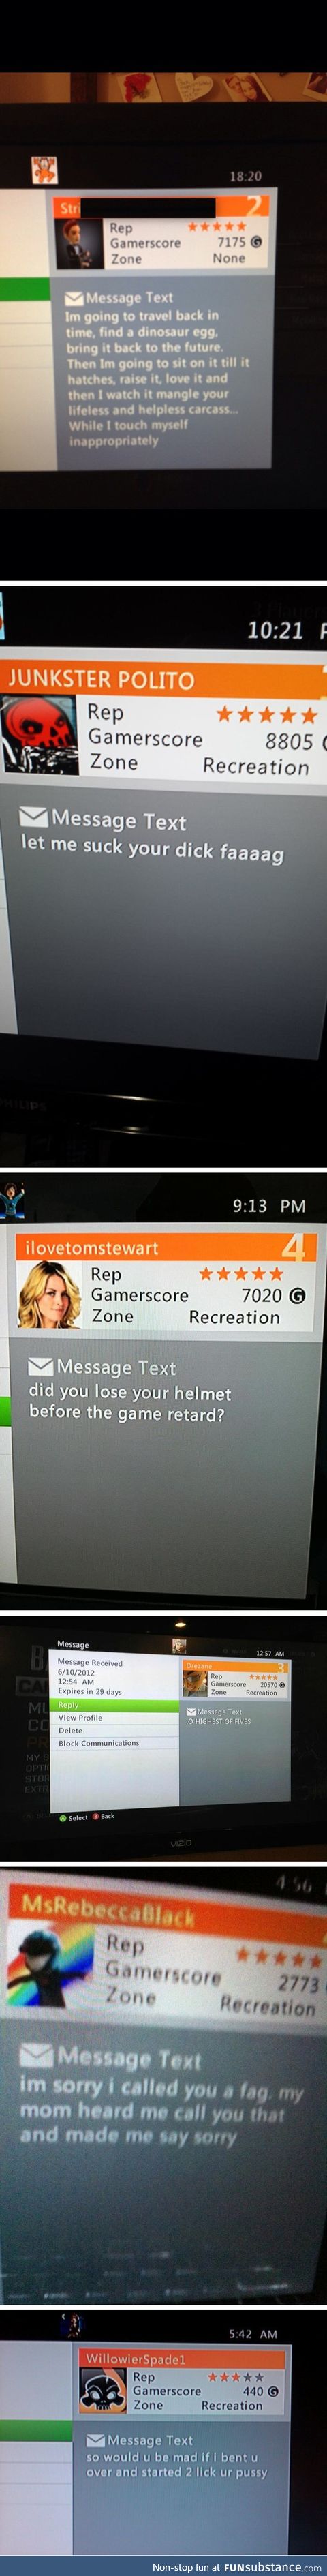 Xbox messages